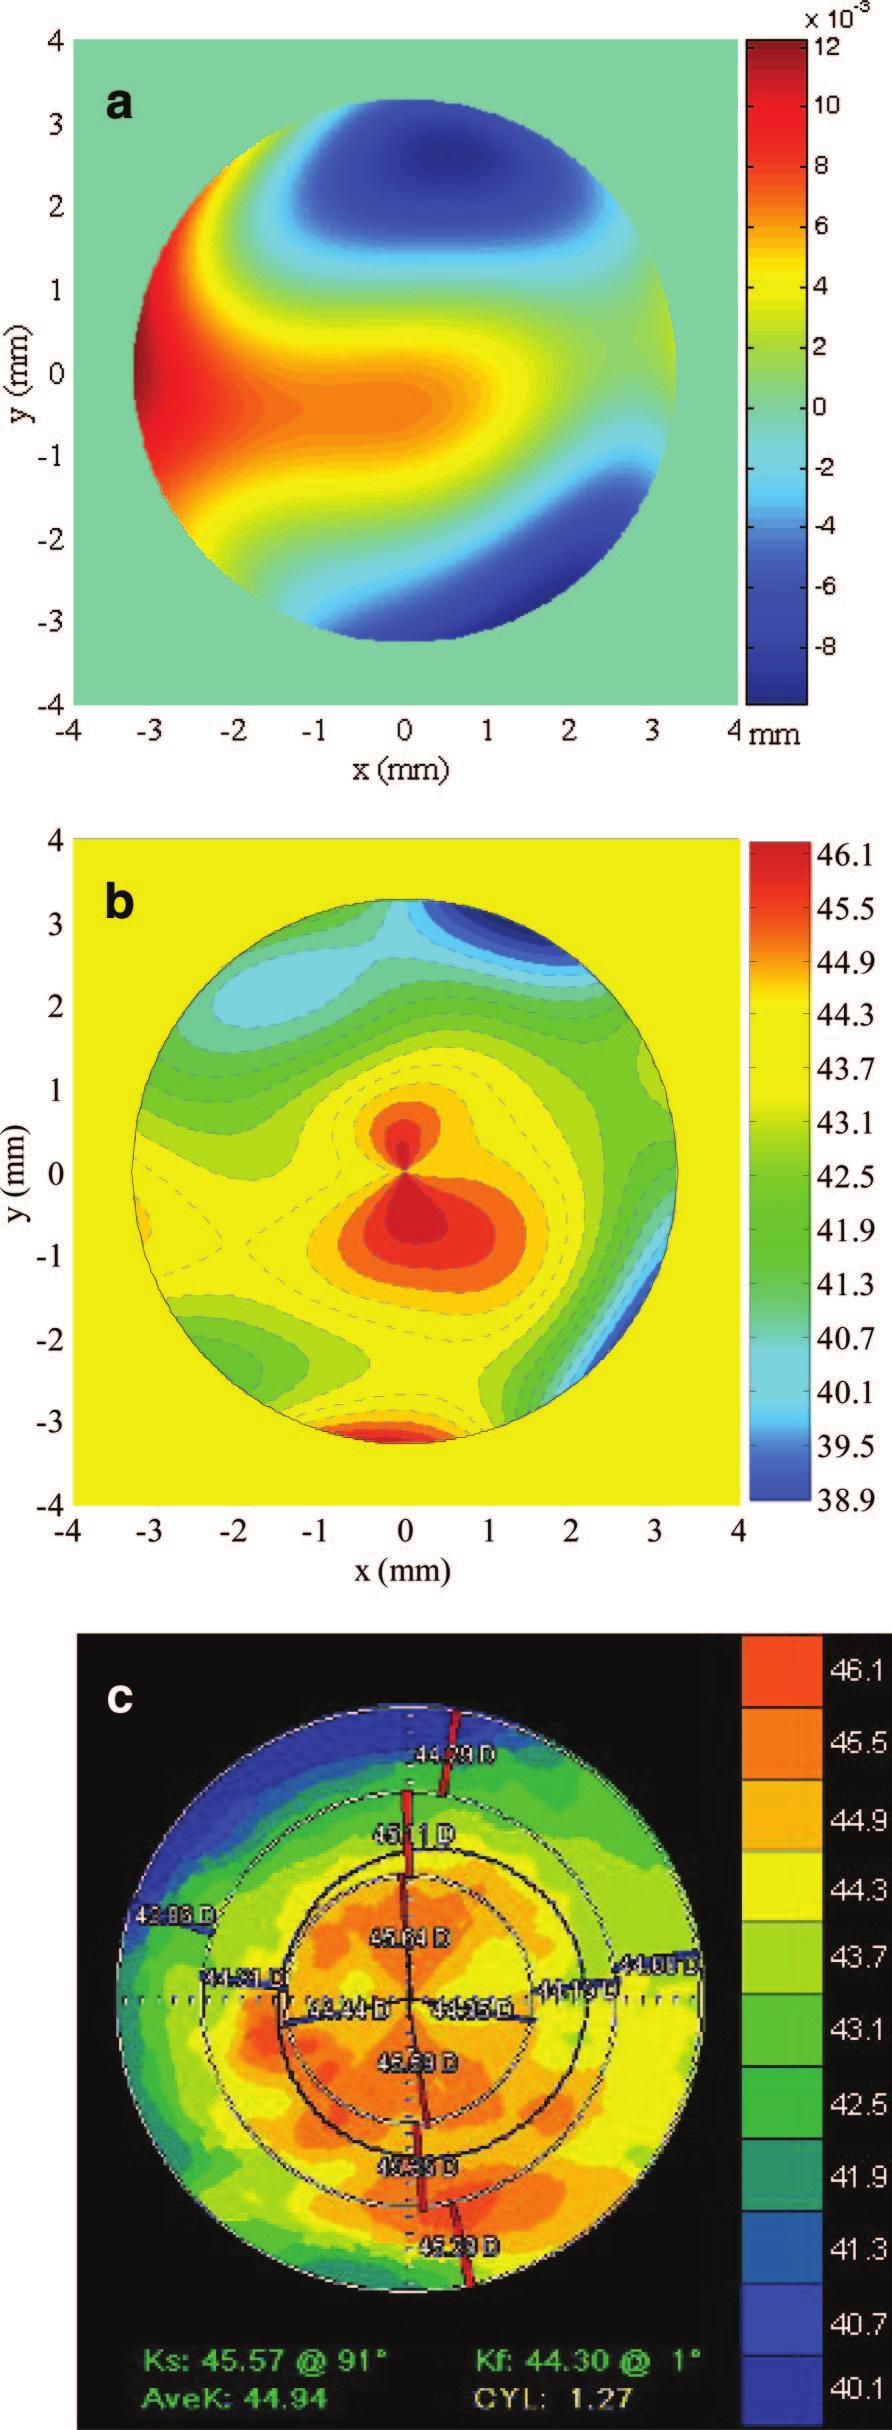 07; (c) meridional curvature from the Tomey TMS-4 topographer with data: 44.76 0.47 129, and AveK 44.53 (Min K 44.26). The parameters for the eye-pupil from the HT topographer are: diameter D 4.